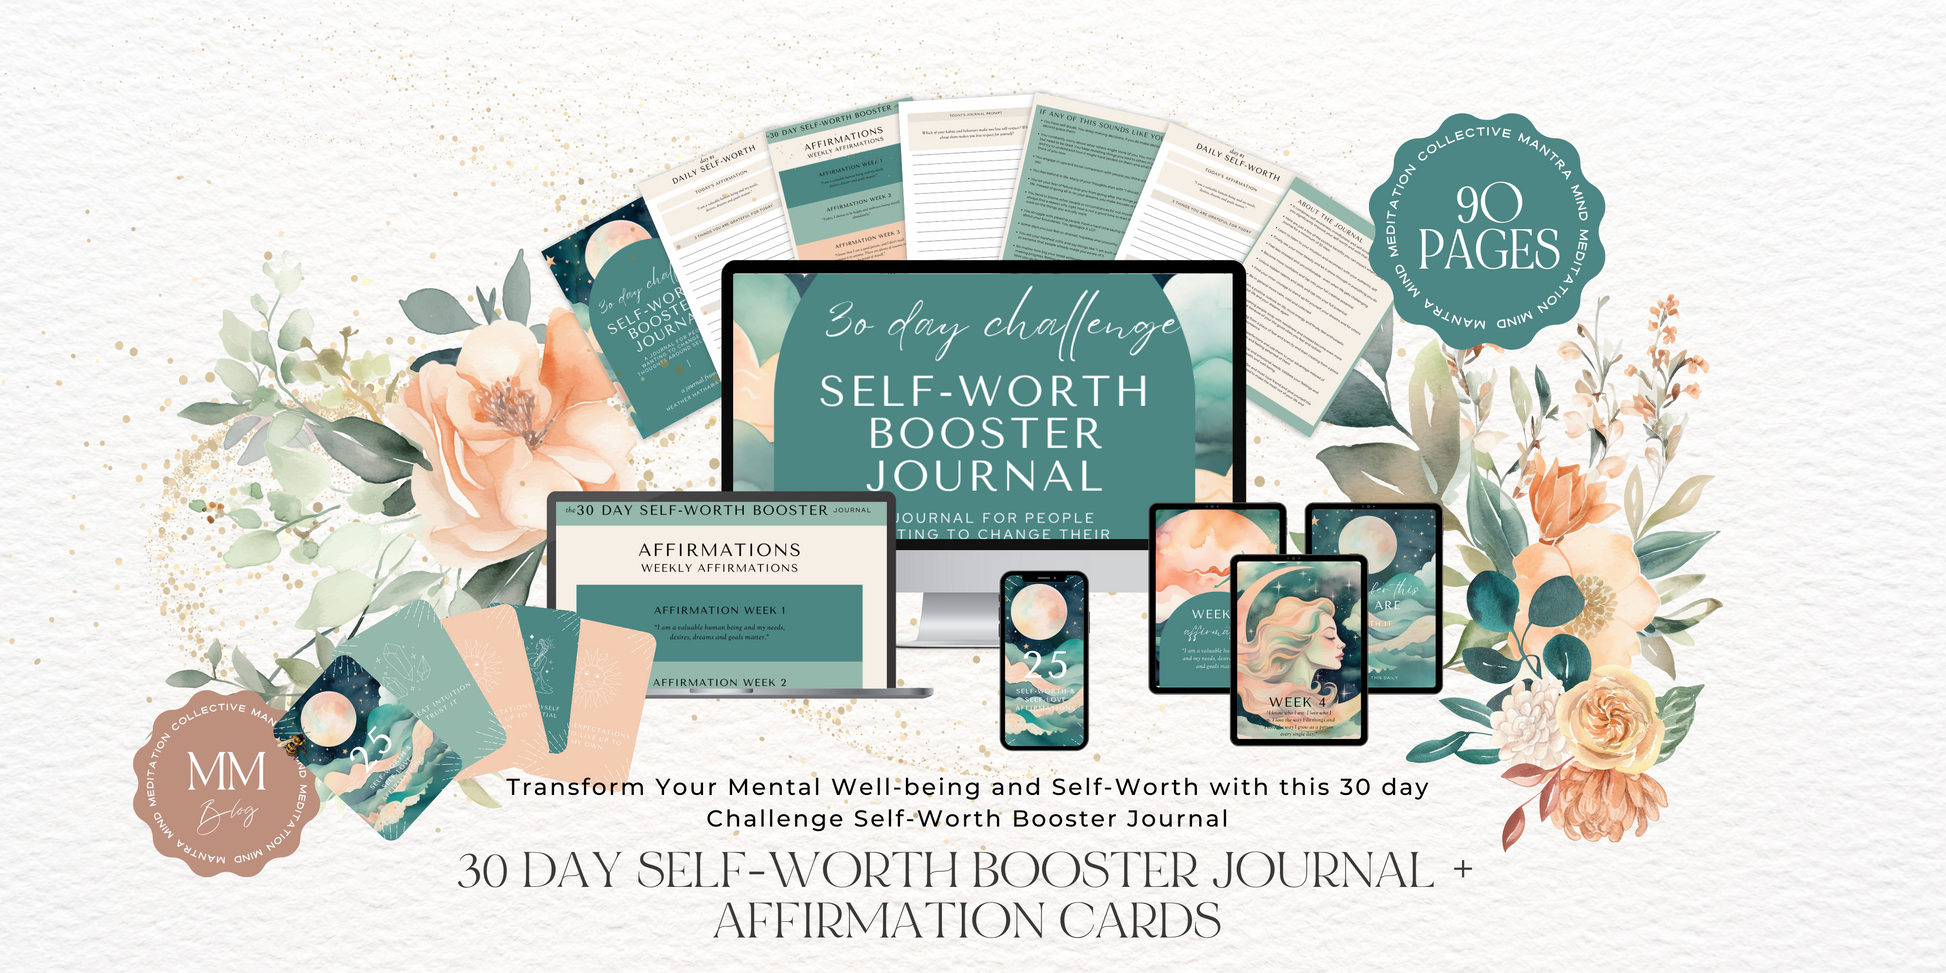 The 30-Day Self-Worth Booster Journal